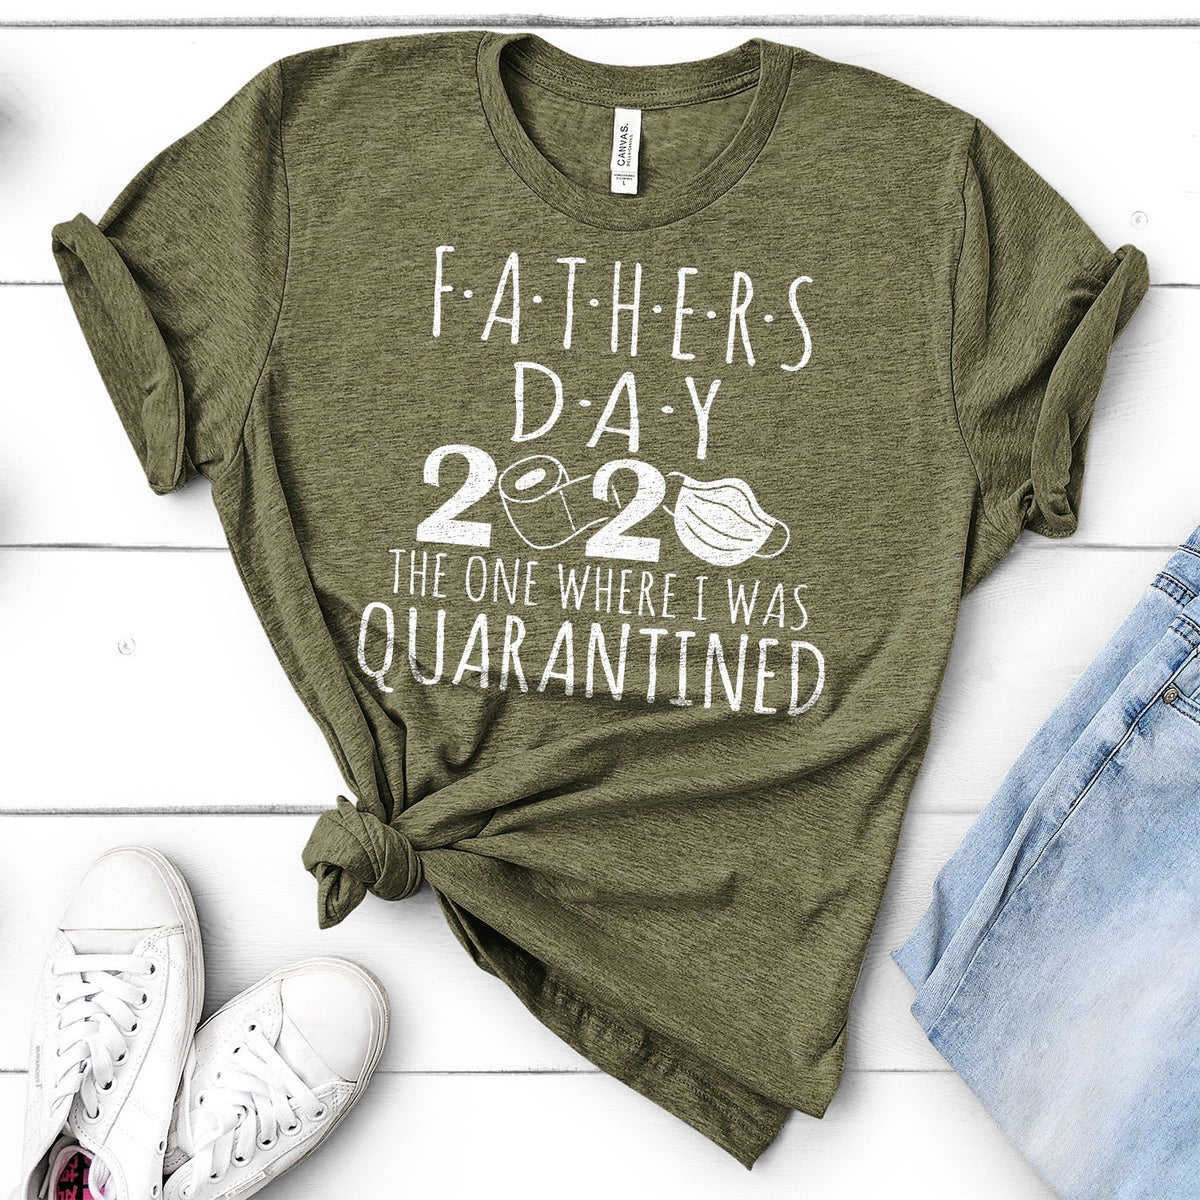 Fathers Day 2020 The One Where I Was Quarantined - Short Sleeve Tee Shirt